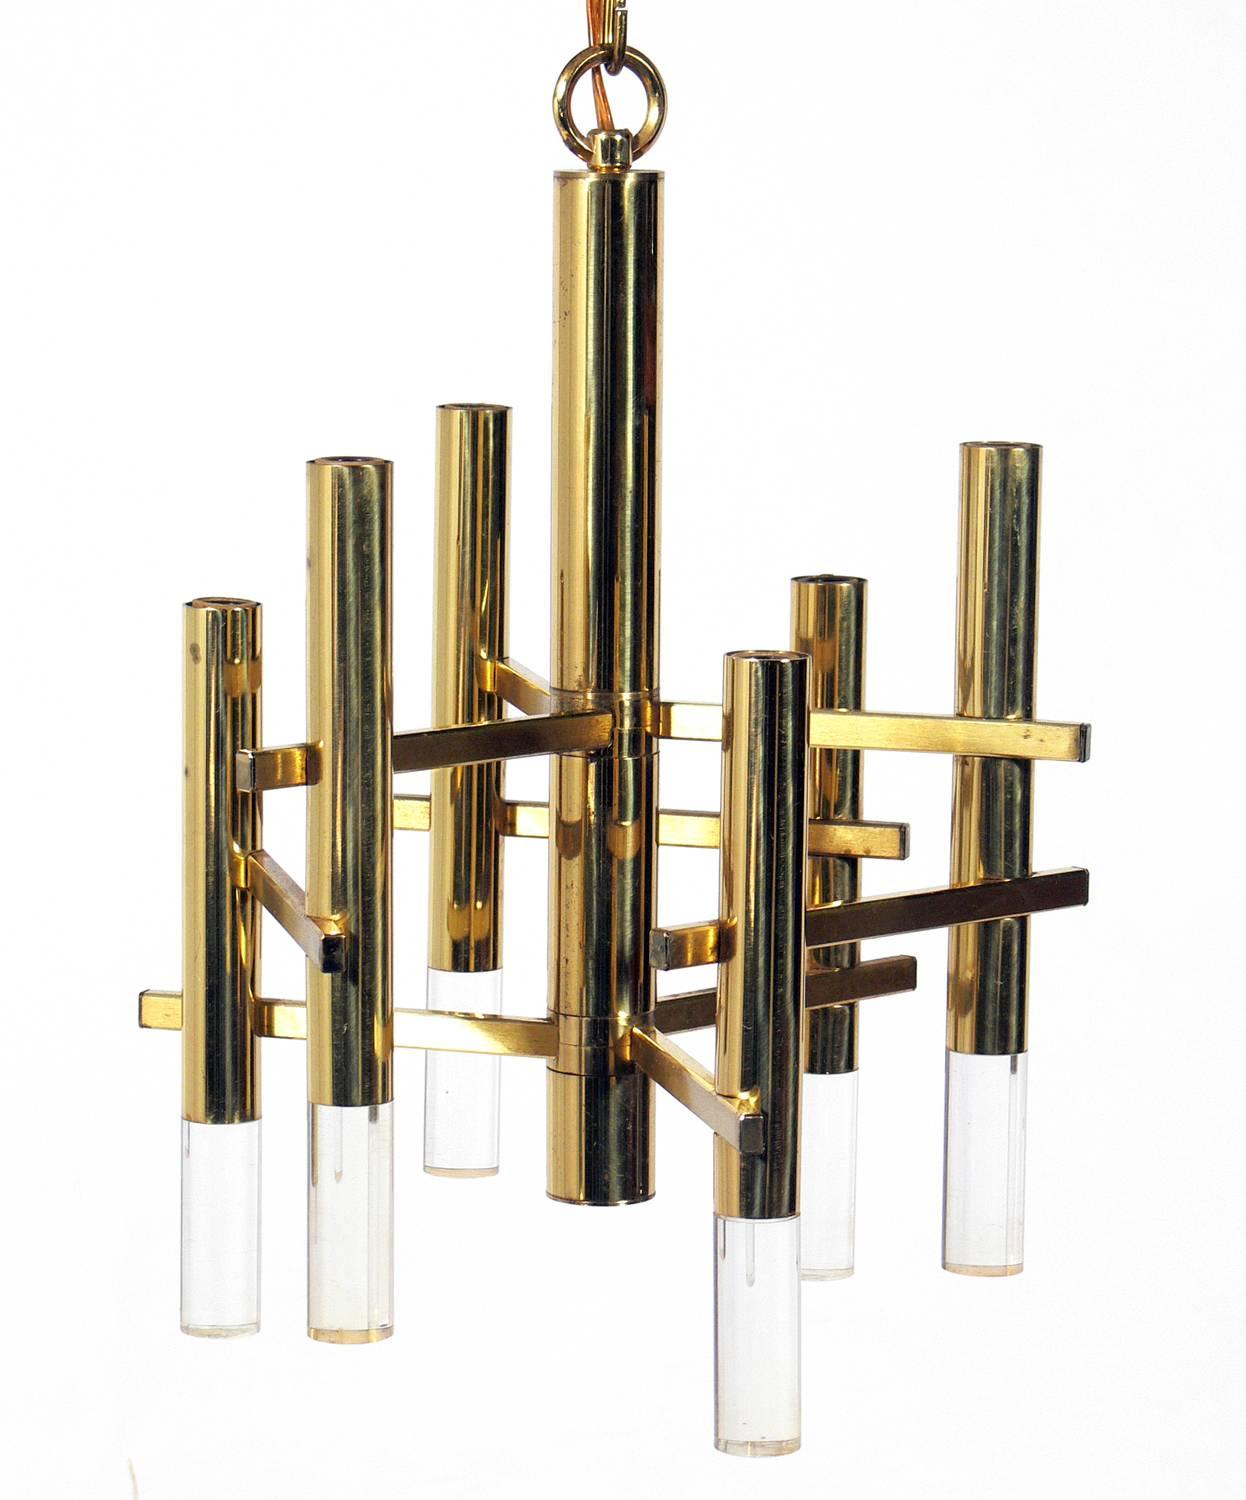 Petite Italian brass and Lucite chandelier by Sciolari, Italian, circa 1960s. Perfect size for a foyer, bathroom, hall, or small bedroom. Retains it's warm original patina. Will be rewired and the drop chain can be shortened or lengthened to suit